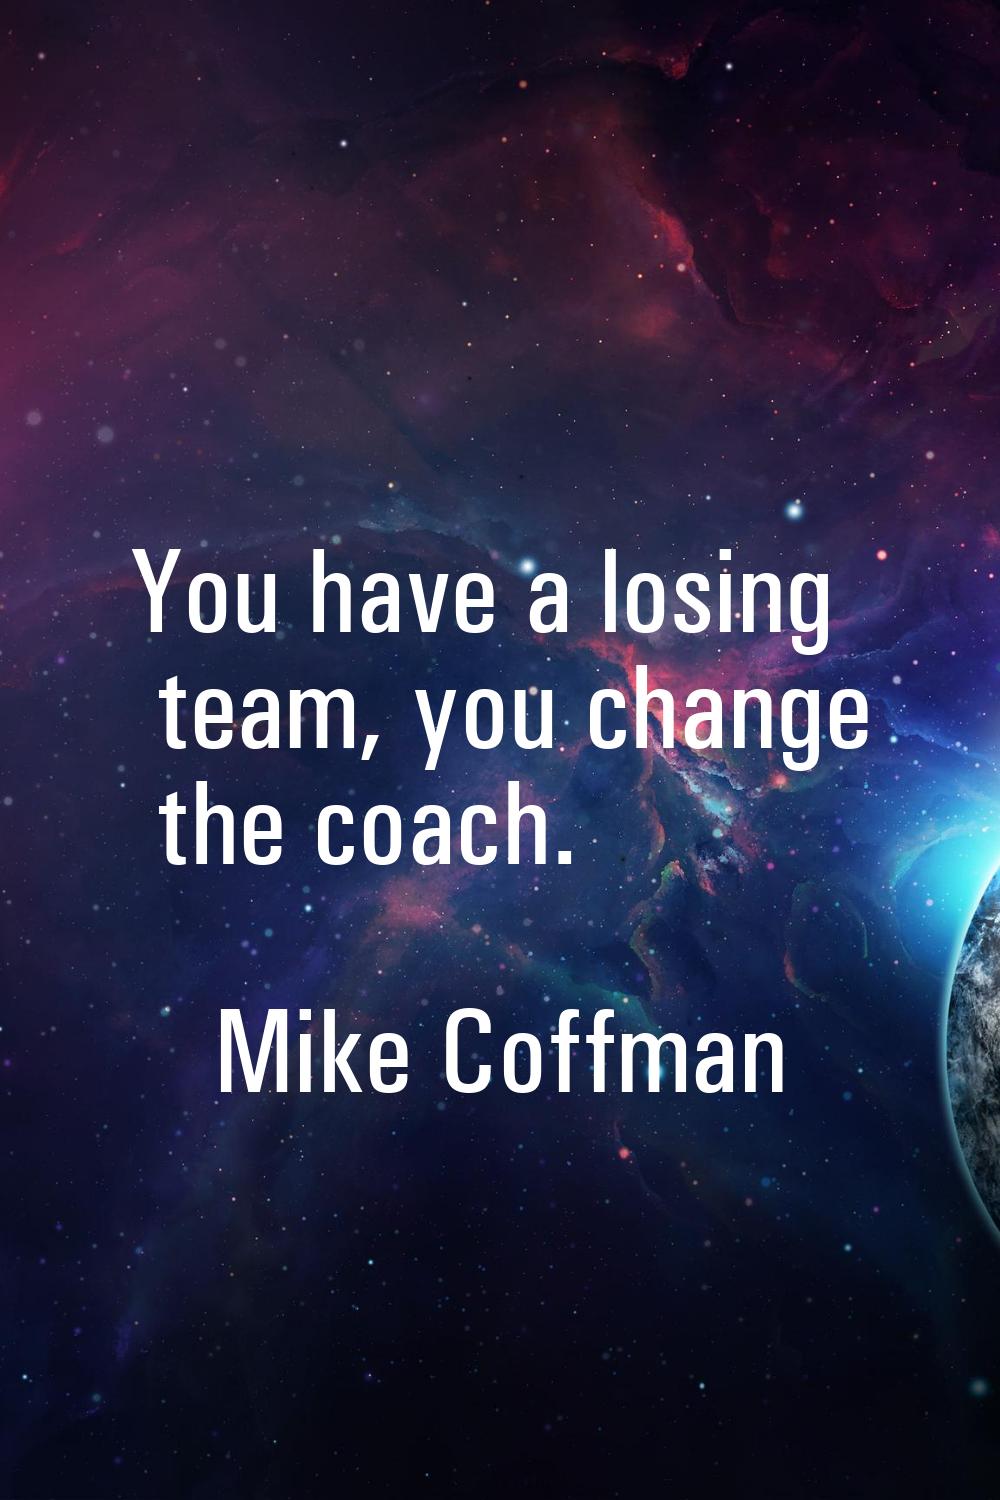 You have a losing team, you change the coach.